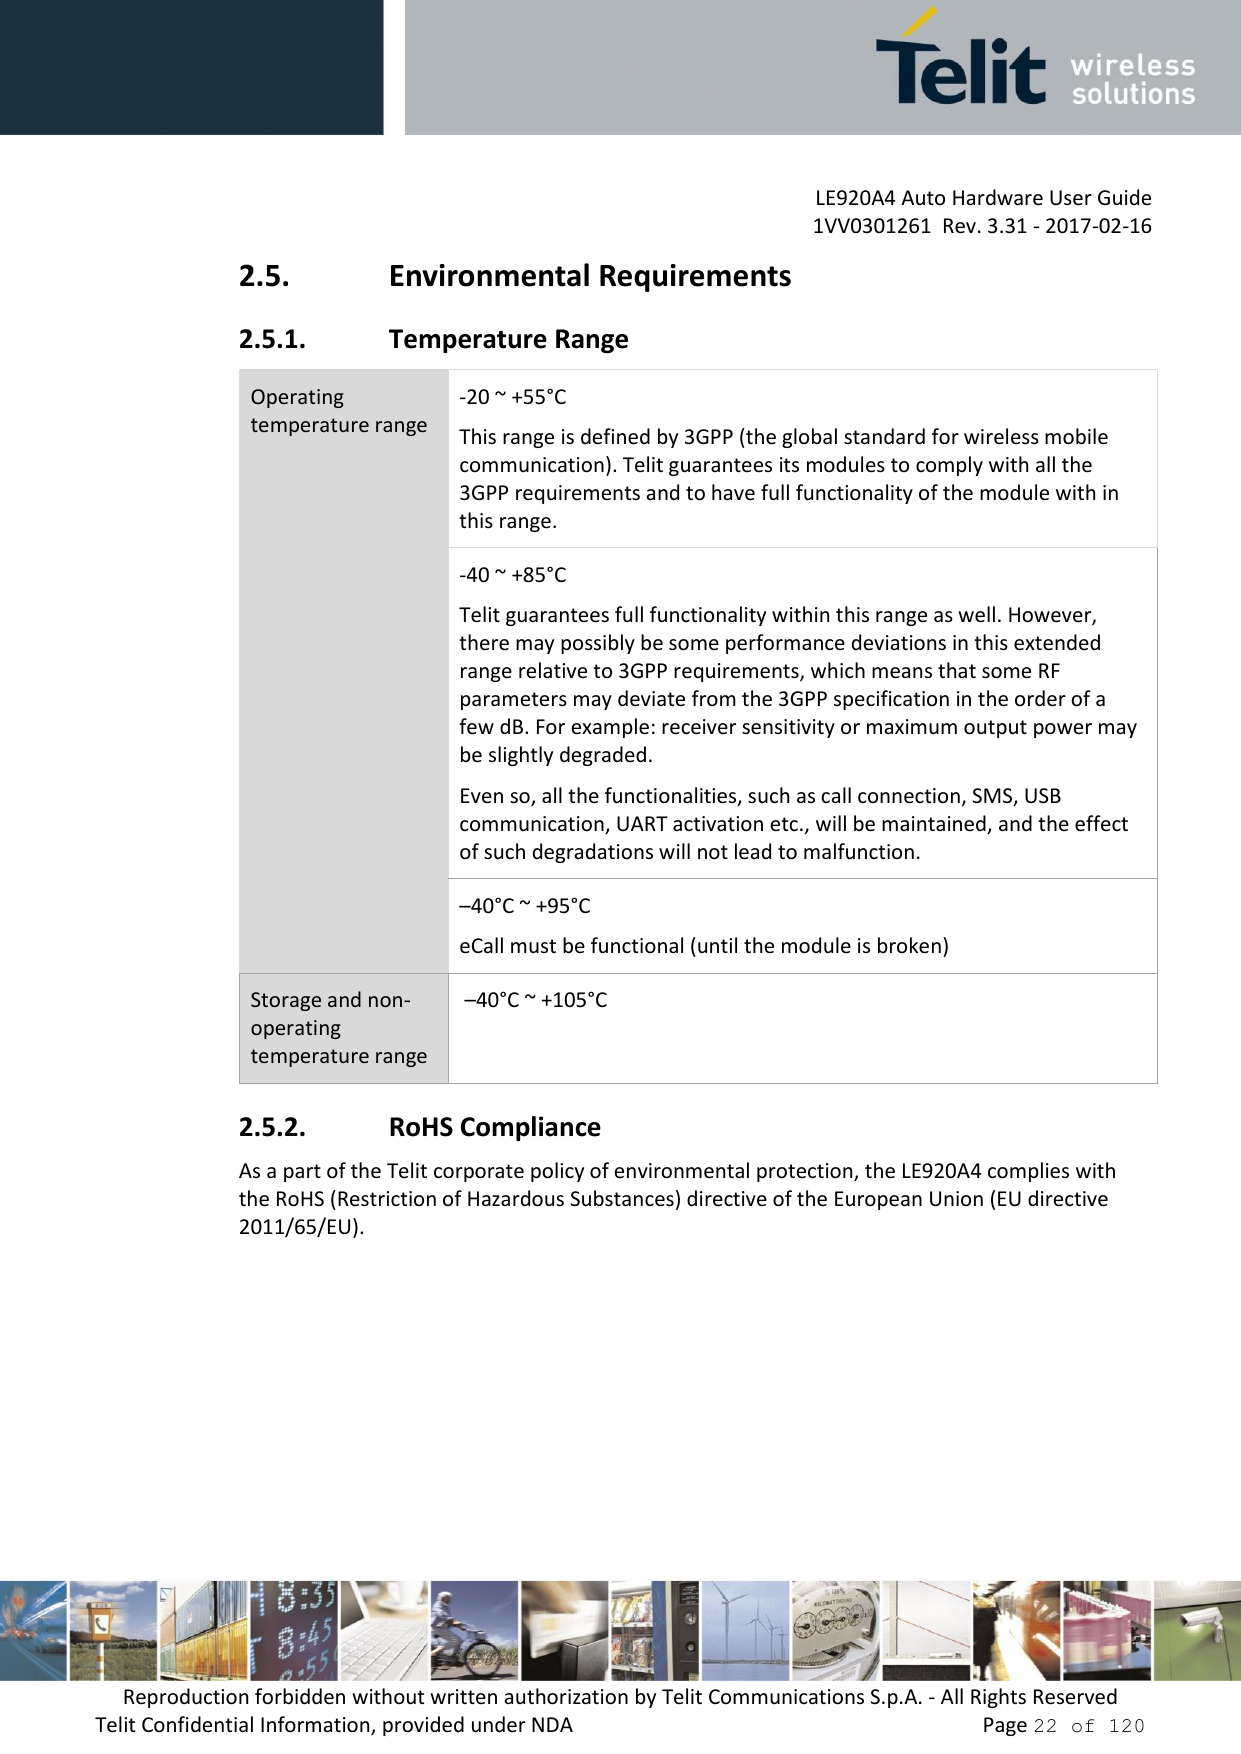         LE920A4 Auto Hardware User Guide     1VV0301261  Rev. 3.31 - 2017-02-16 Reproduction forbidden without written authorization by Telit Communications S.p.A. - All Rights Reserved Telit Confidential Information, provided under NDA                 Page 22 of 120 2.5. Environmental Requirements 2.5.1. Temperature Range Operating temperature range -20 ~ +55°C This range is defined by 3GPP (the global standard for wireless mobile communication). Telit guarantees its modules to comply with all the 3GPP requirements and to have full functionality of the module with in this range. -40 ~ +85°C Telit guarantees full functionality within this range as well. However, there may possibly be some performance deviations in this extended range relative to 3GPP requirements, which means that some RF parameters may deviate from the 3GPP specification in the order of a few dB. For example: receiver sensitivity or maximum output power may be slightly degraded.  Even so, all the functionalities, such as call connection, SMS, USB communication, UART activation etc., will be maintained, and the effect of such degradations will not lead to malfunction. –40°C ~ +95°C eCall must be functional (until the module is broken) Storage and non-operating temperature range  –40°C ~ +105°C 2.5.2. RoHS Compliance As a part of the Telit corporate policy of environmental protection, the LE920A4 complies with the RoHS (Restriction of Hazardous Substances) directive of the European Union (EU directive 2011/65/EU).    